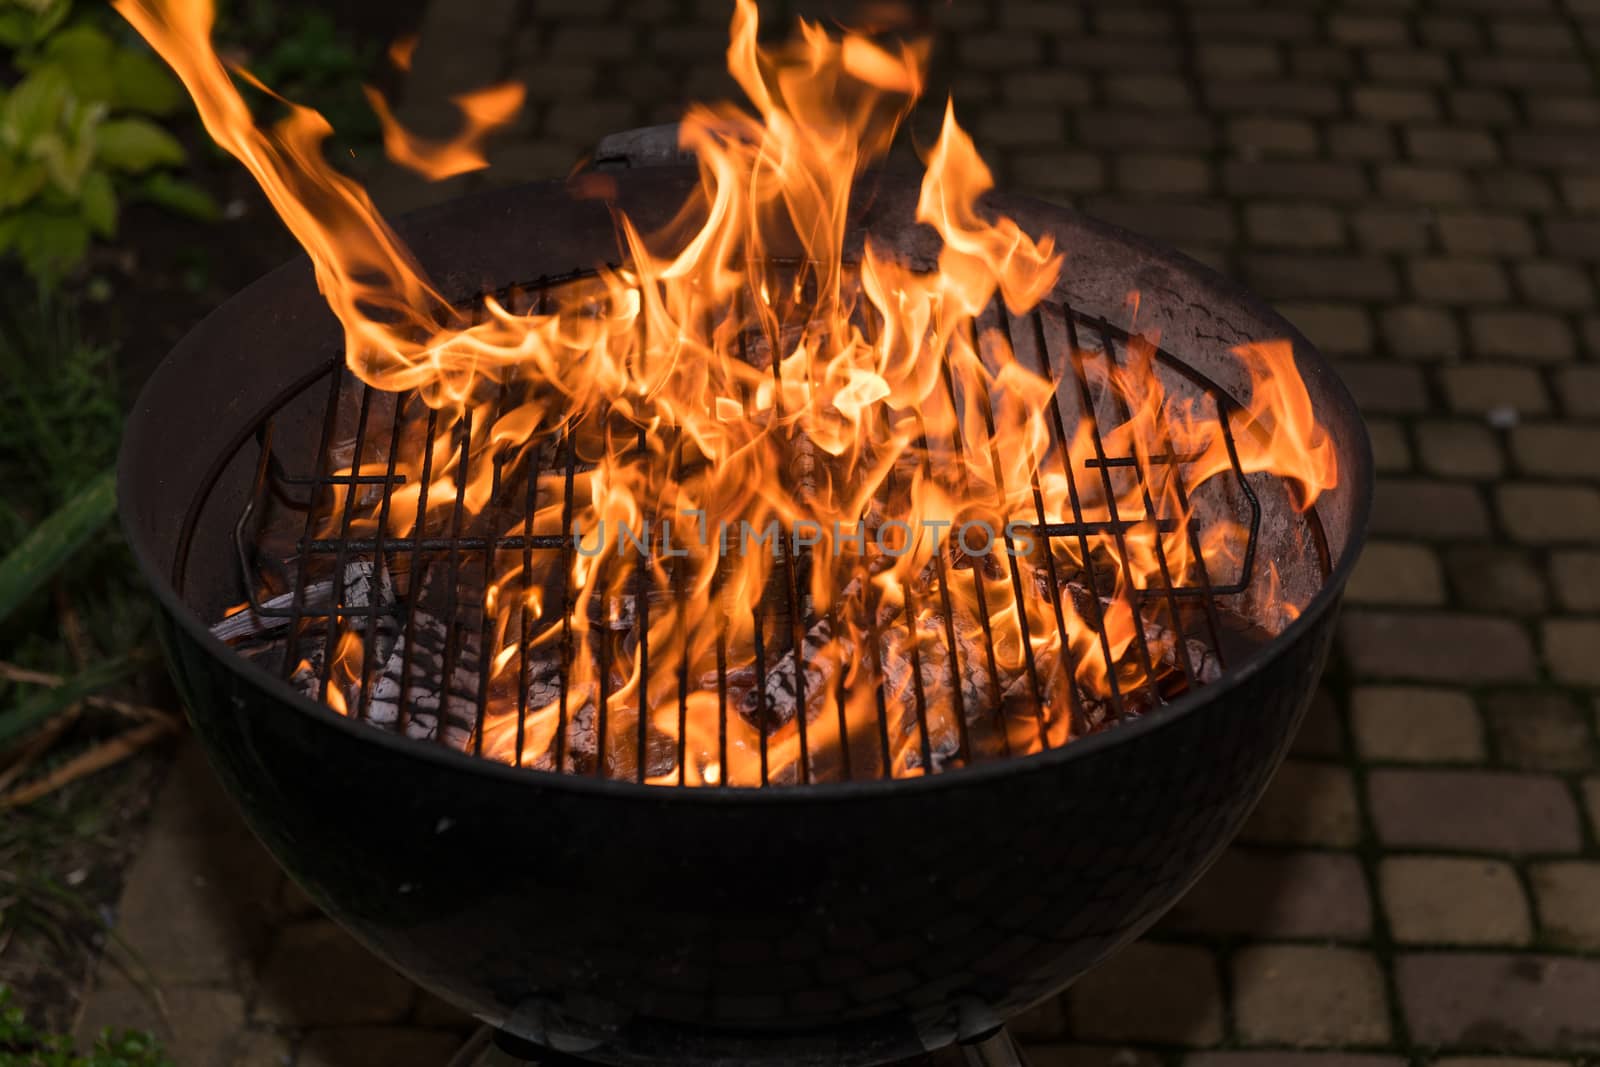 Close-up of blazing fire in BBQ grill at evening.